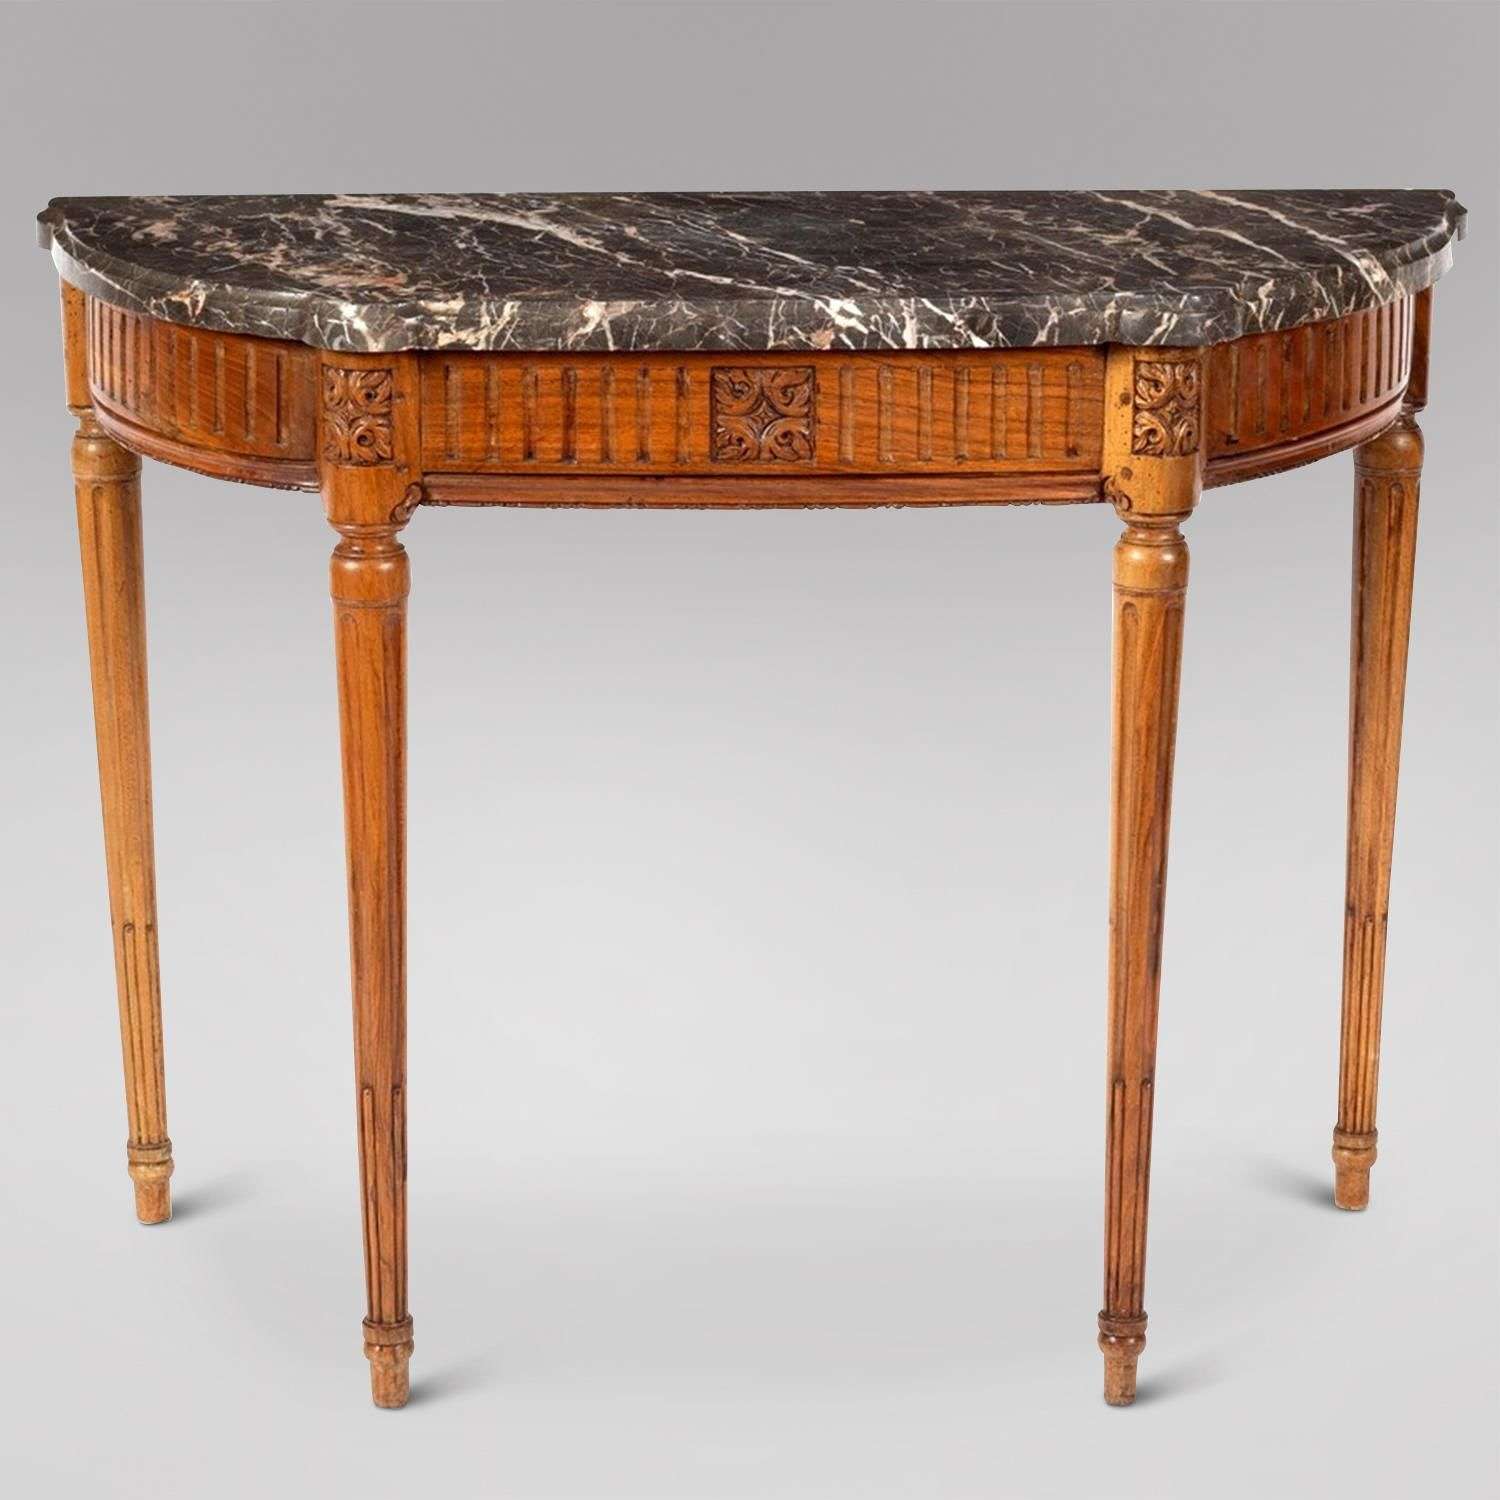 A Louis XV1 Provincial Walnut Console Table